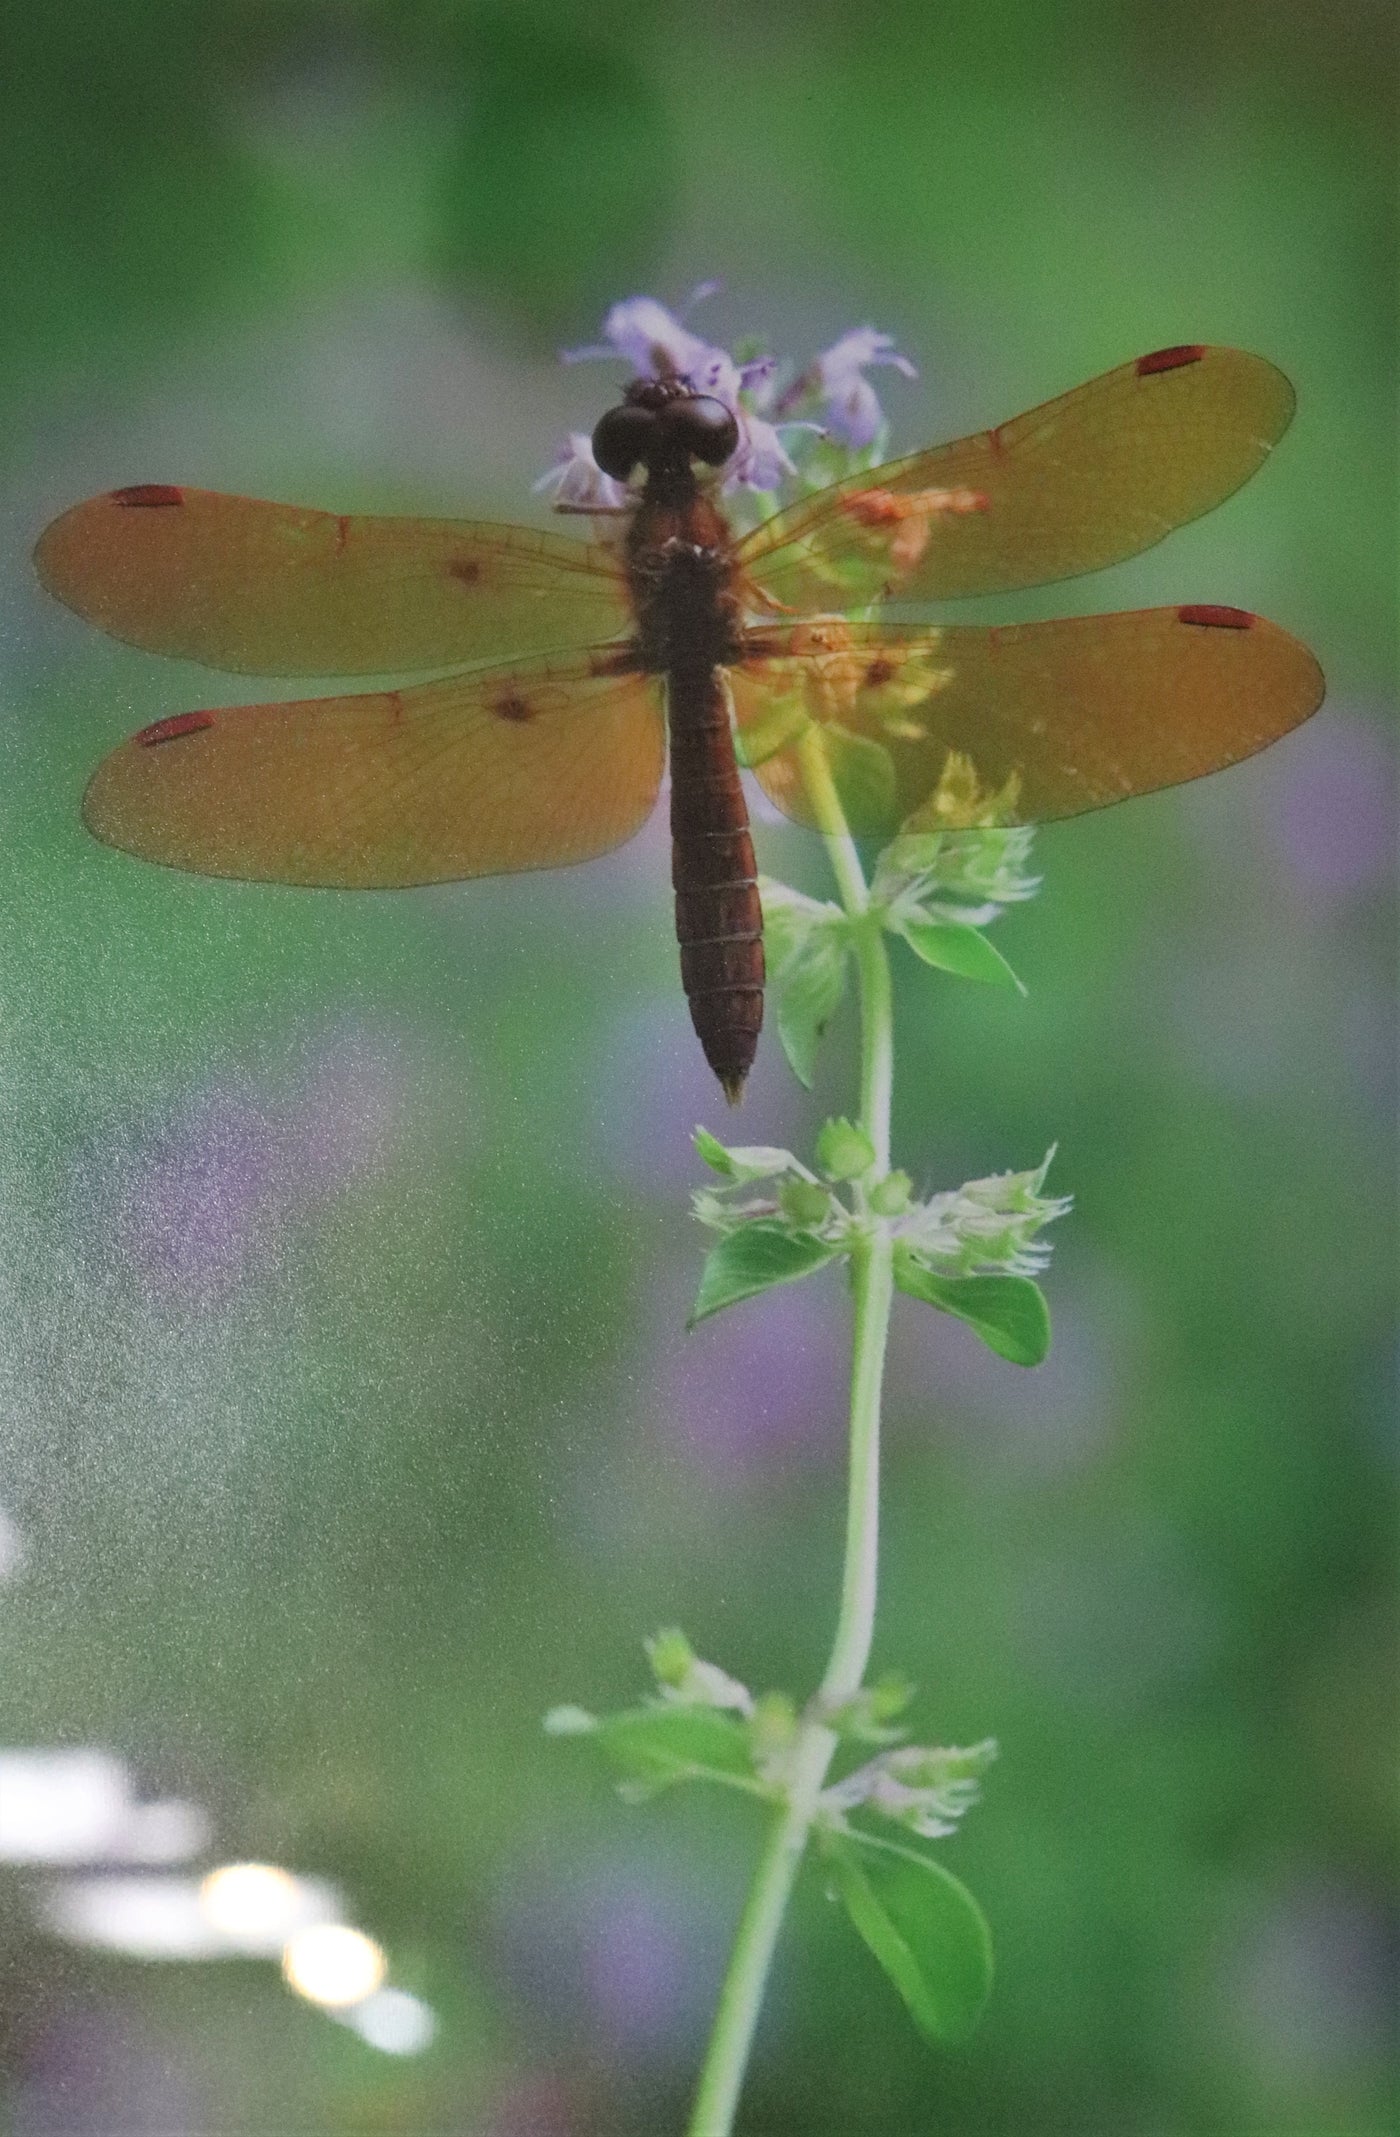 13 1/2" x 17 1/2" Dragonfly - Photo signed by photographer